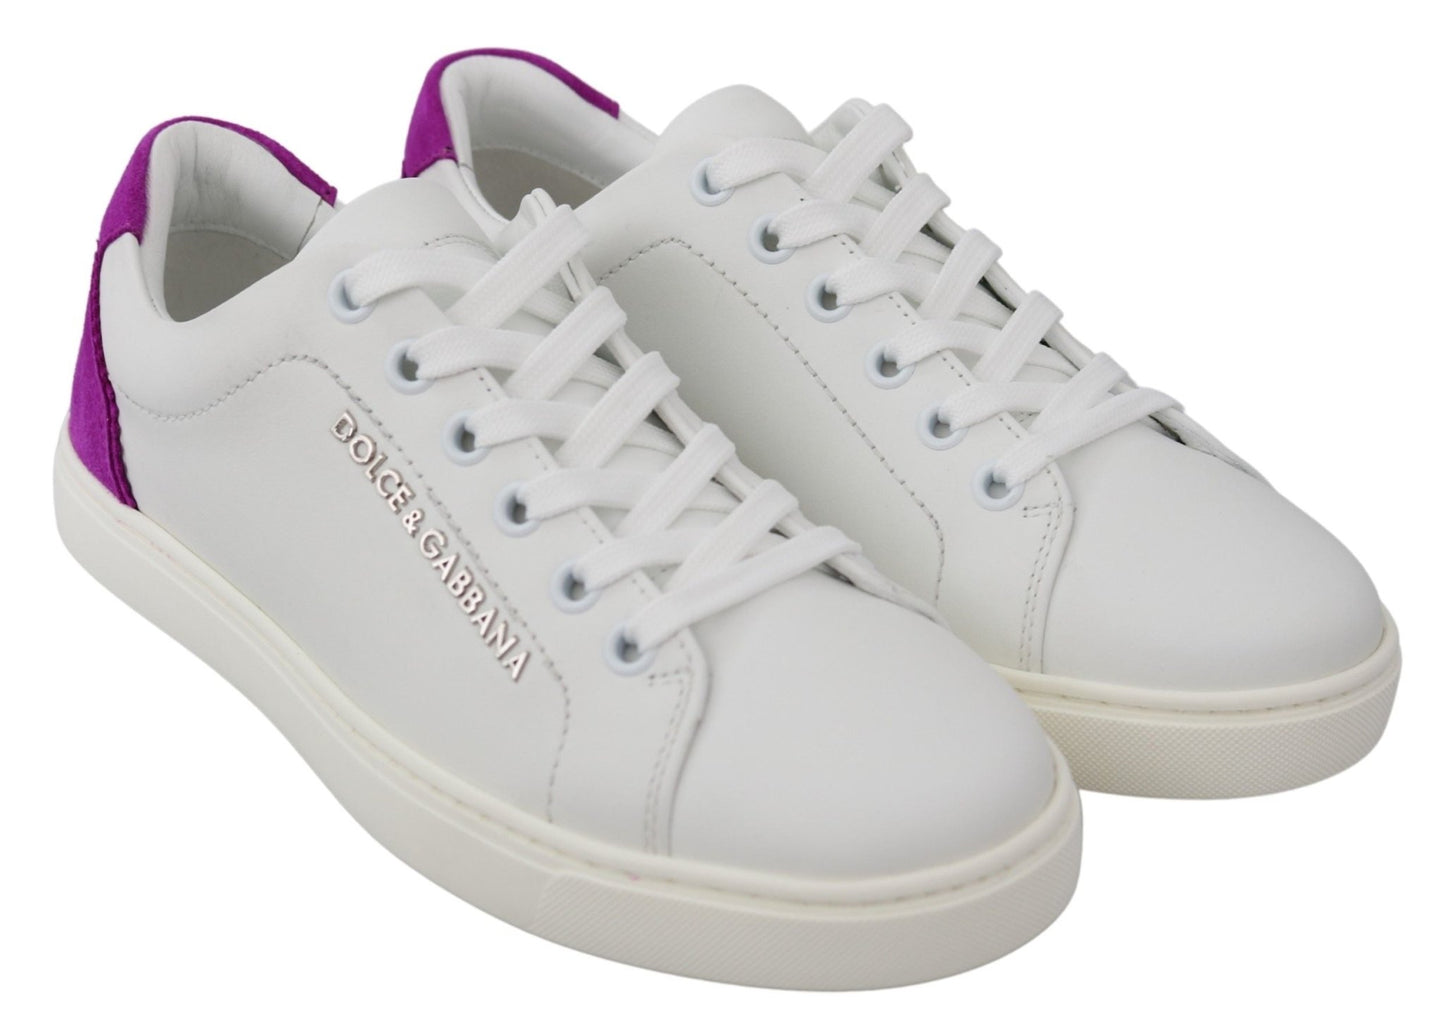 Dolce & Gabbana Chic White Leather Sneakers with Purple Accents